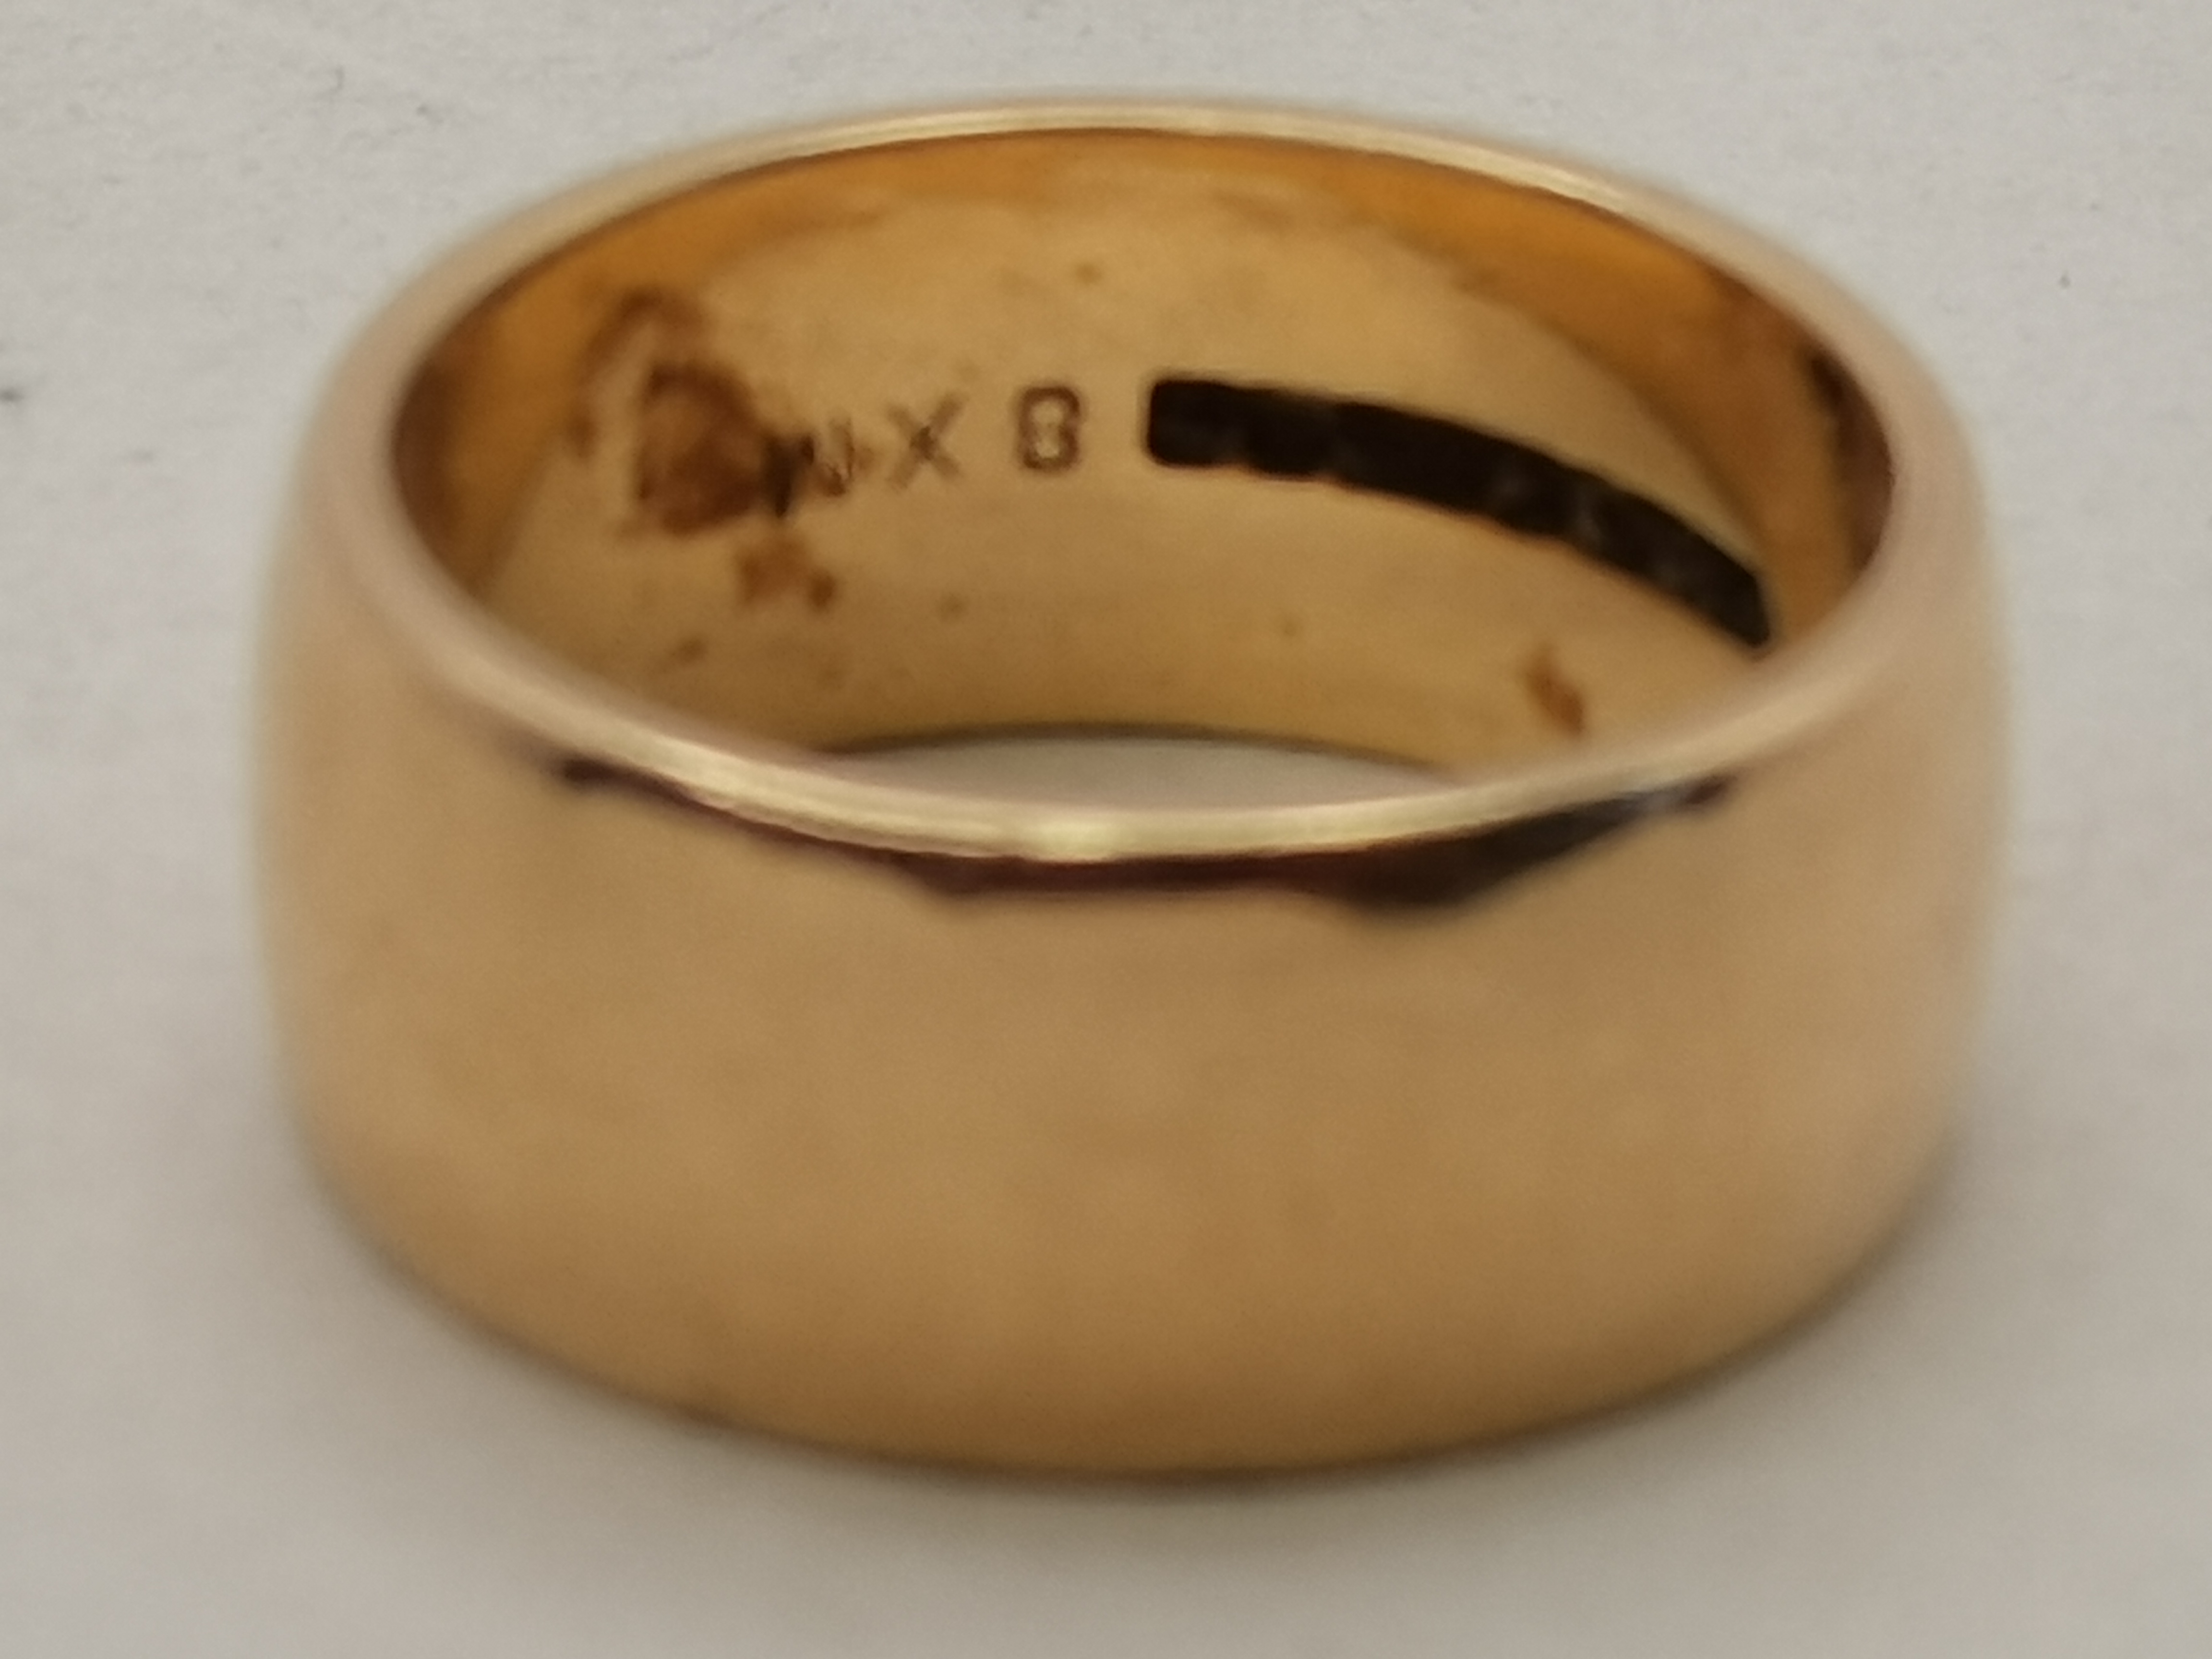 Two 9 carat gold rings - Image 5 of 6